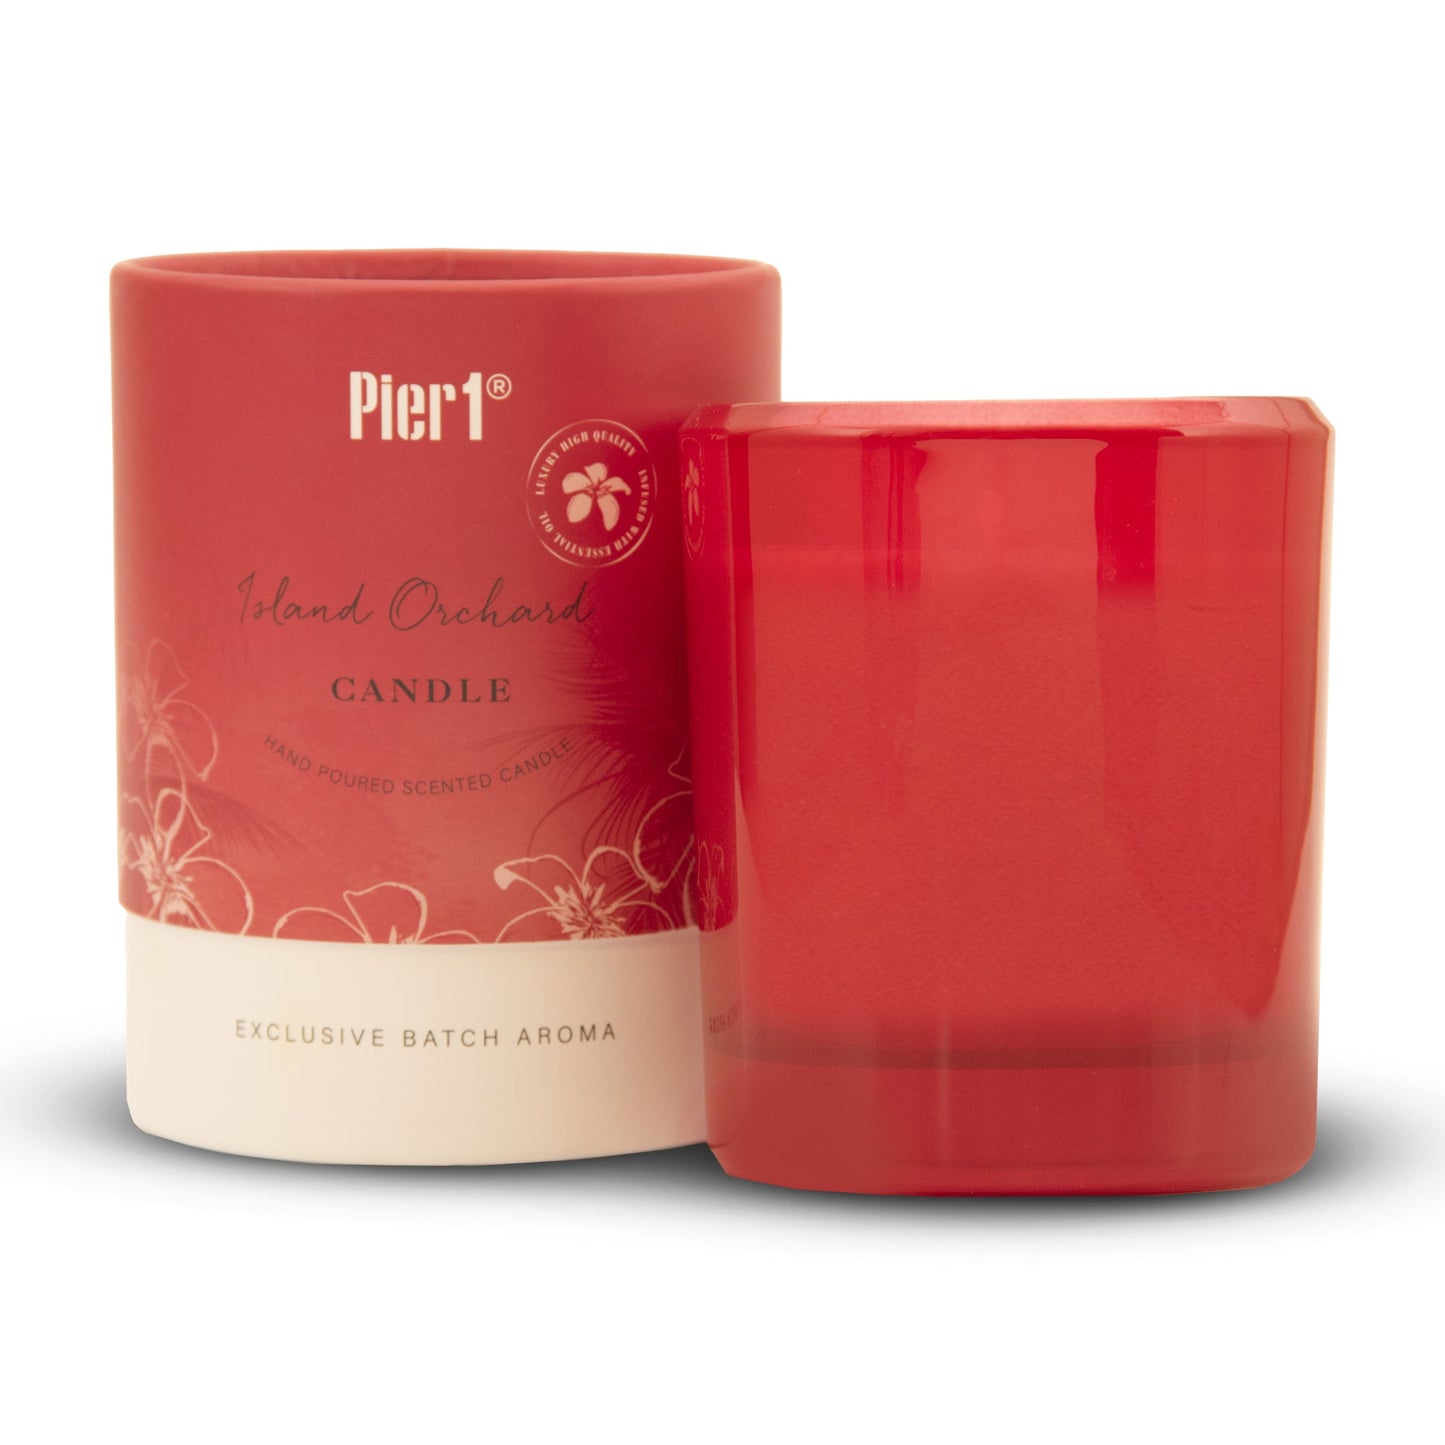 Pier 1 Island Orchard 8oz Boxed Soy Candle - The Home Resolution